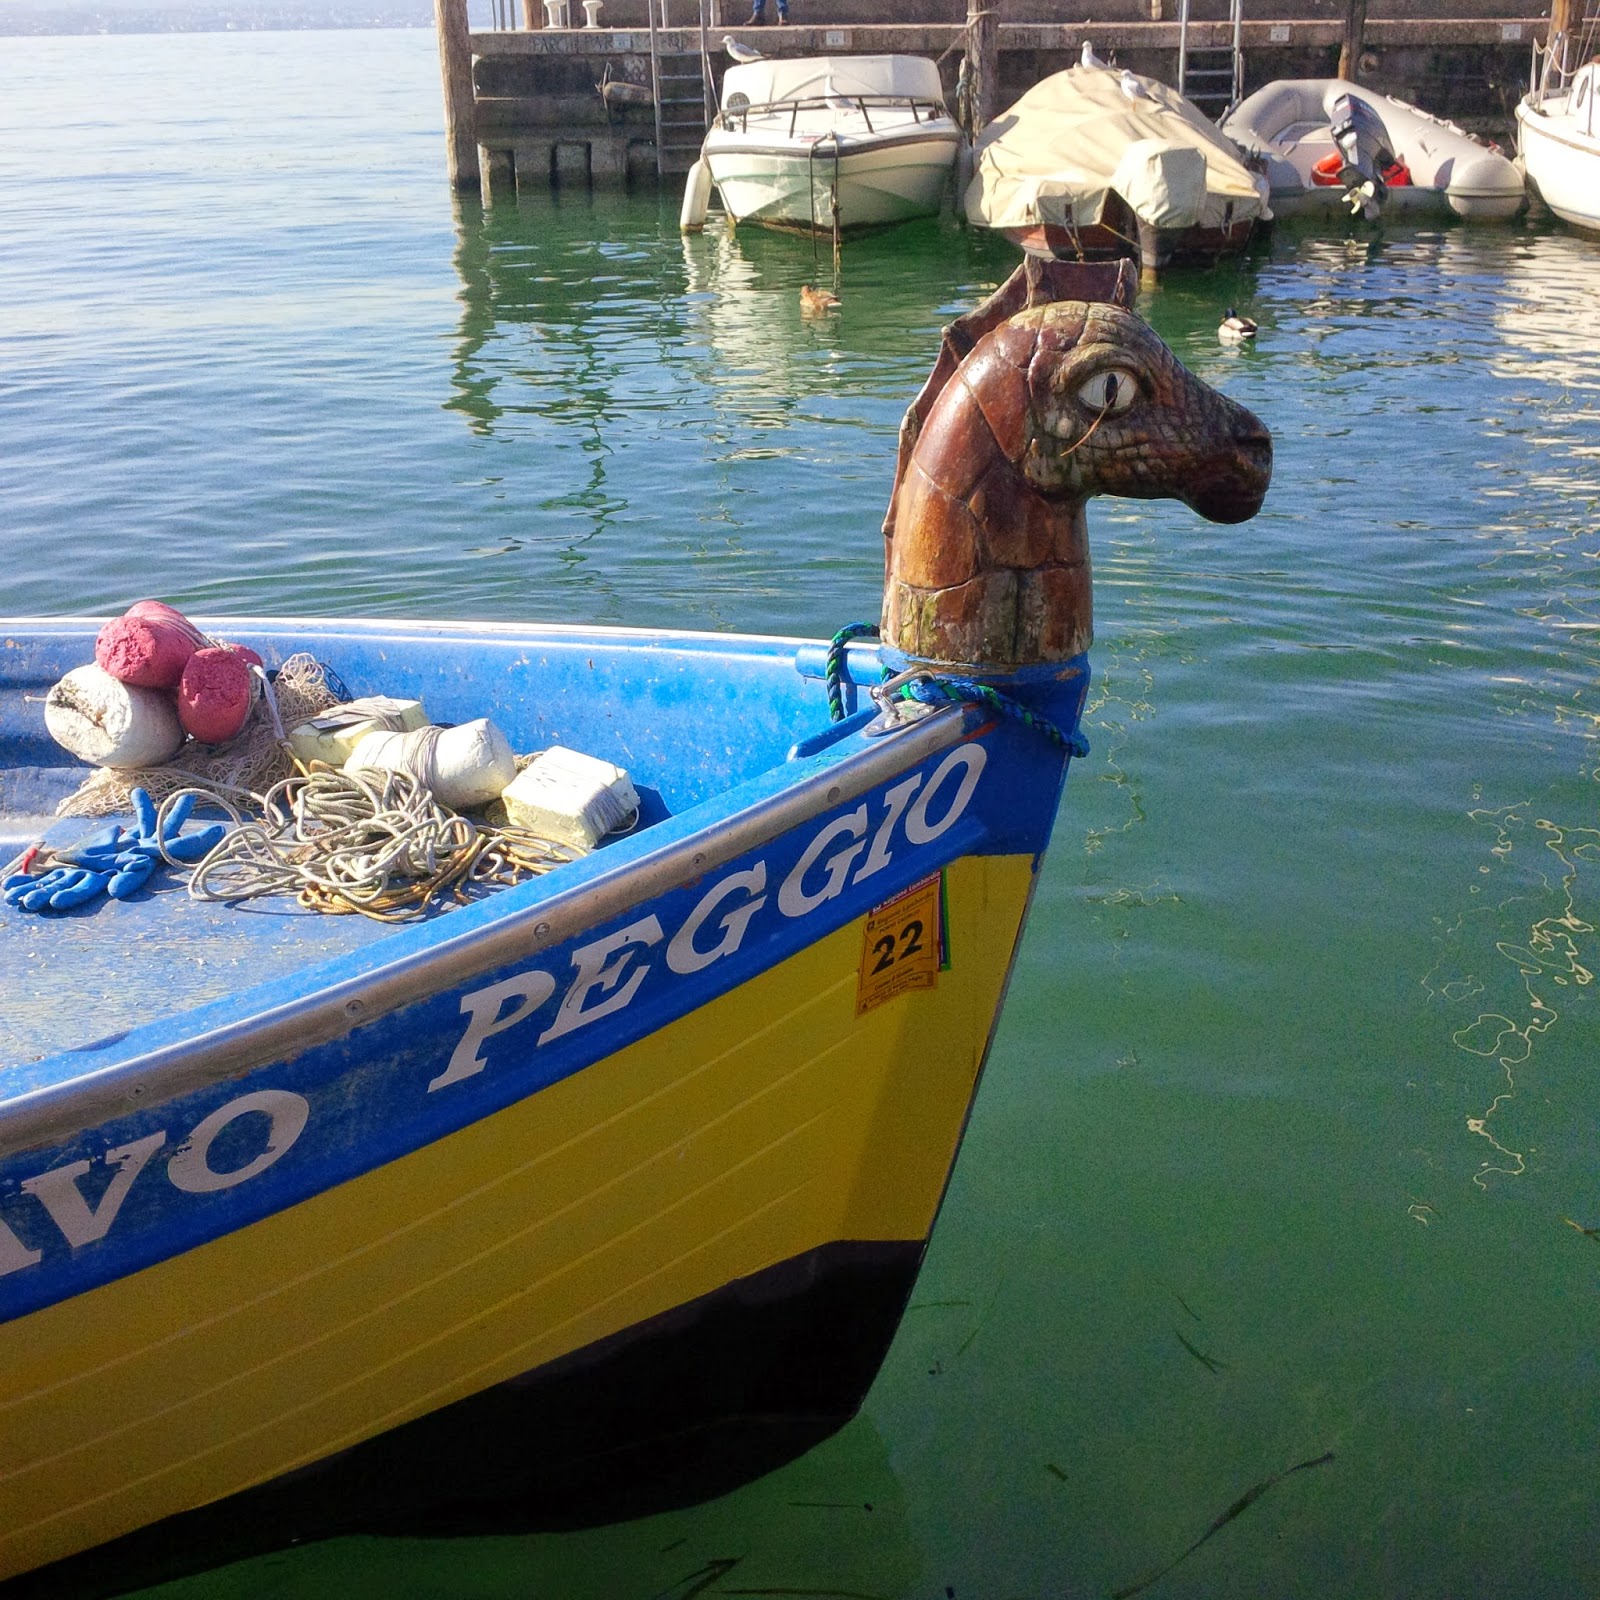 A seahorse figurehead on a boat in Sirmione's harbour